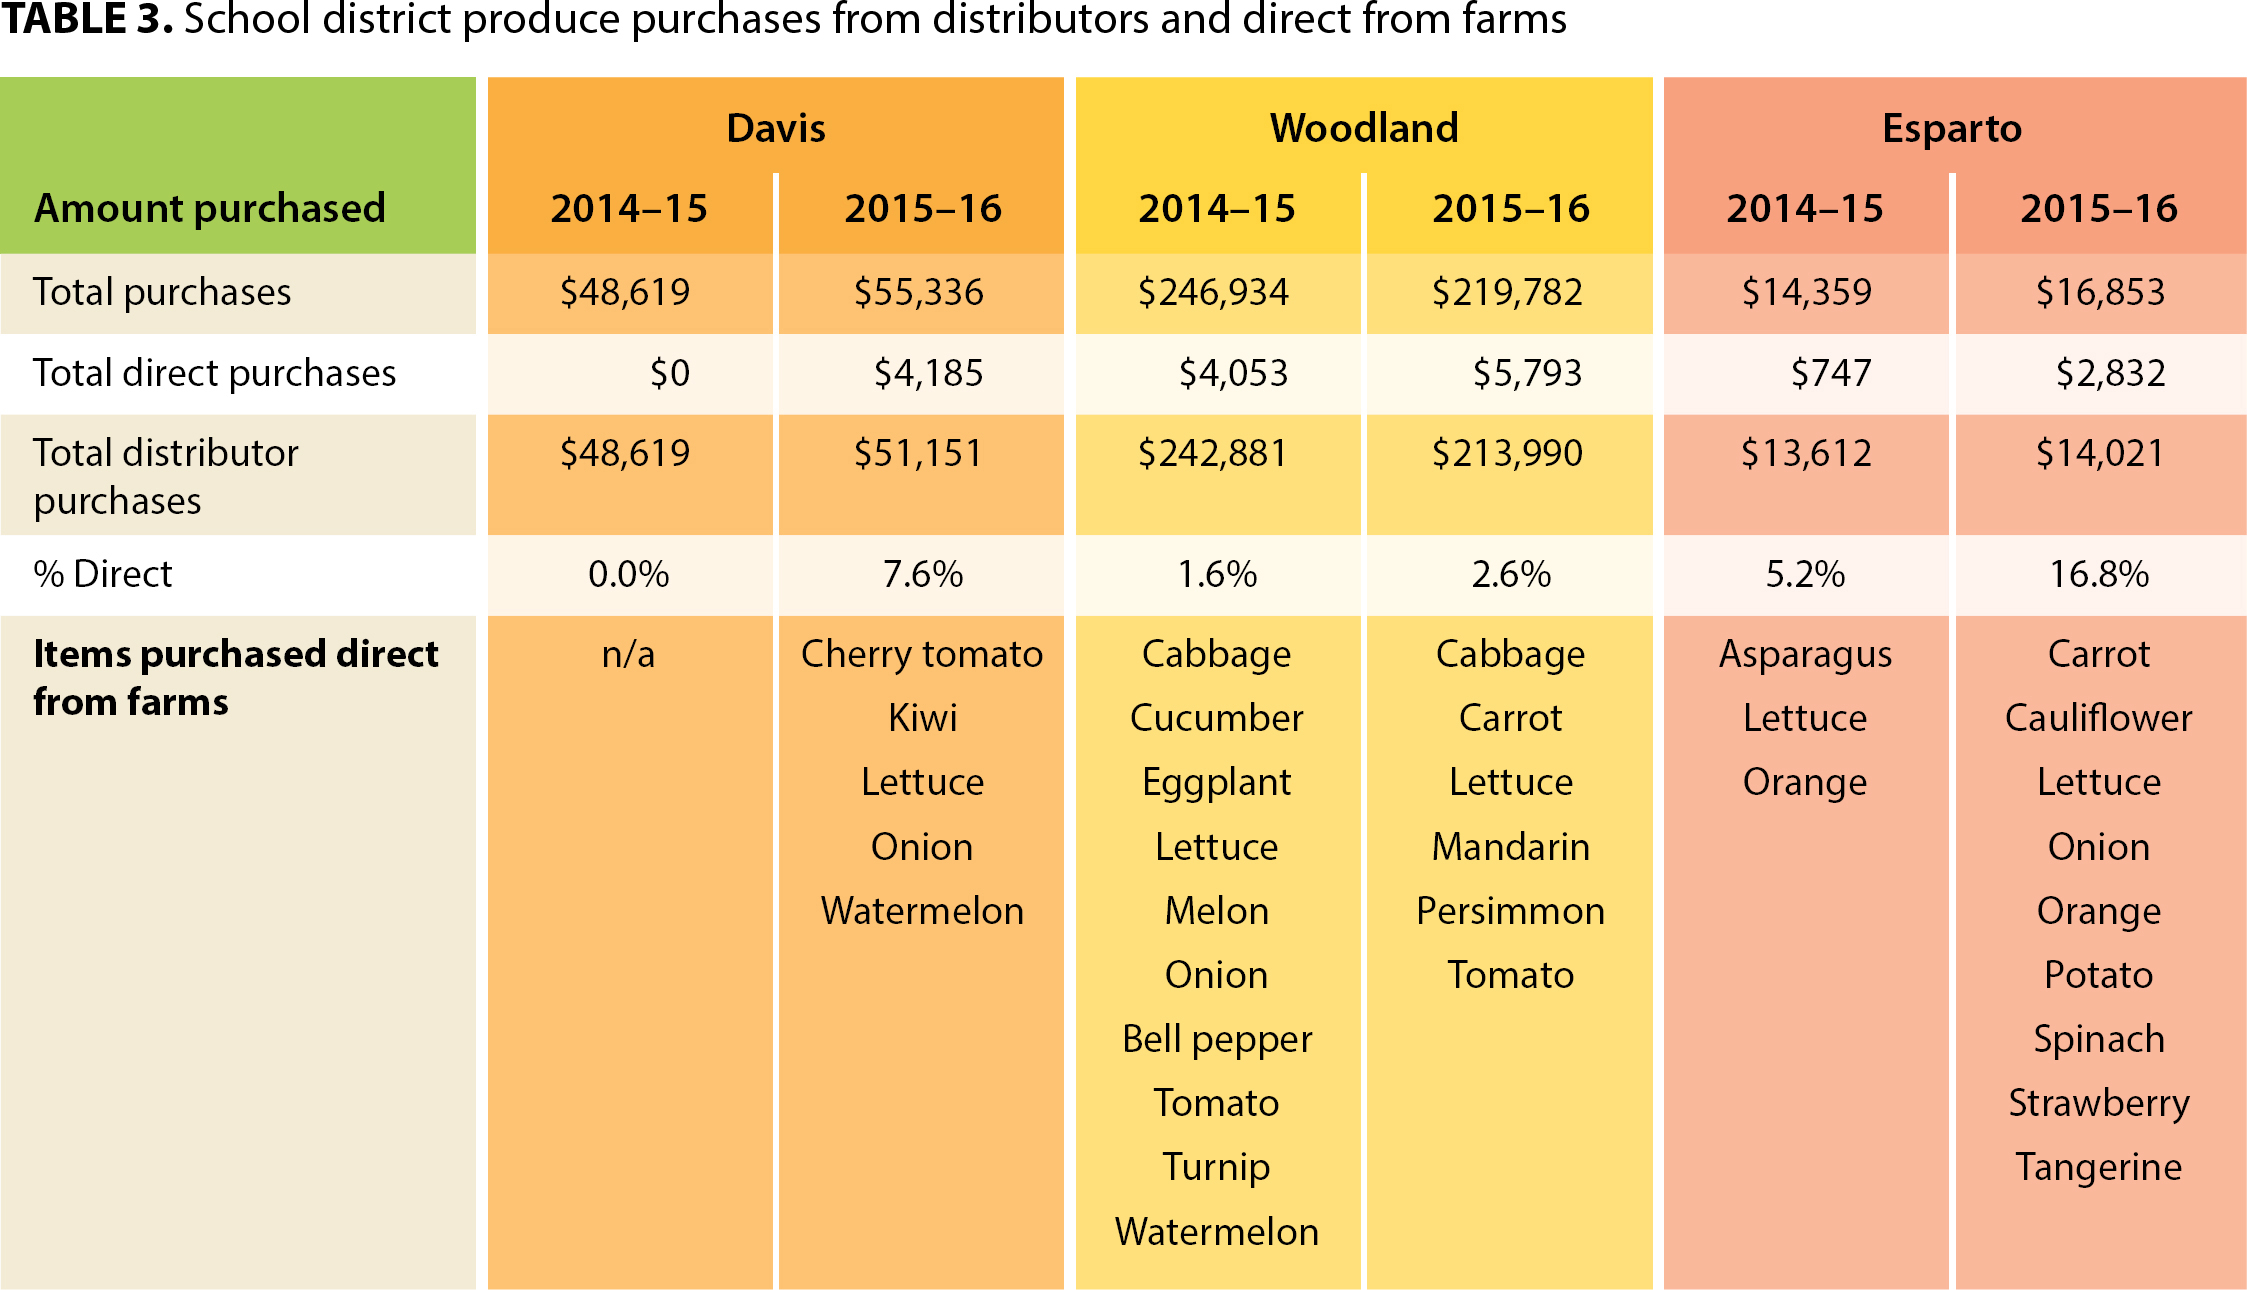 School district produce purchases from distributors and direct from farms